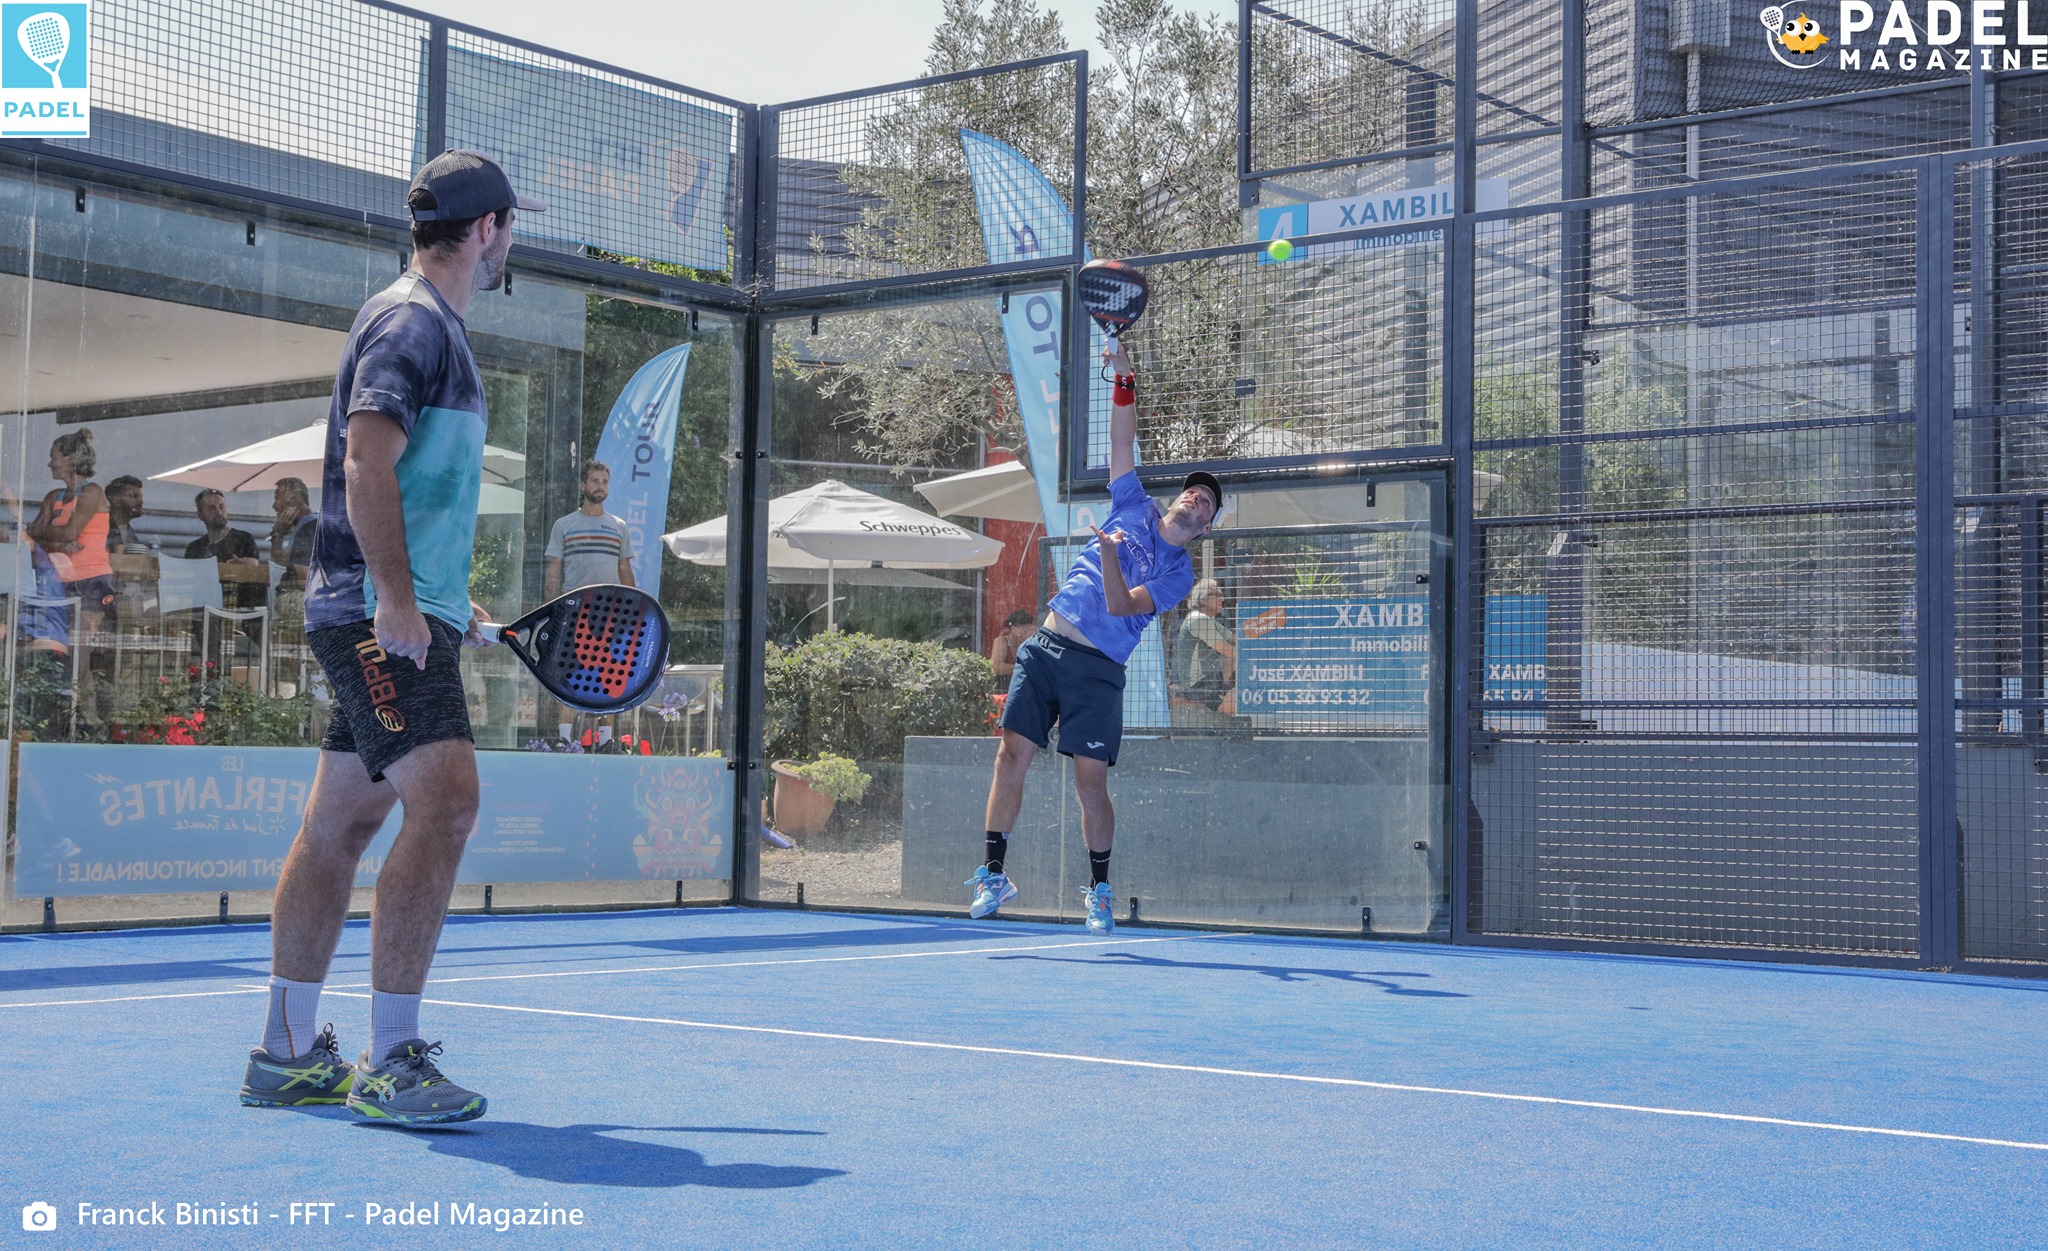 interclubs padel : only one day left to register!